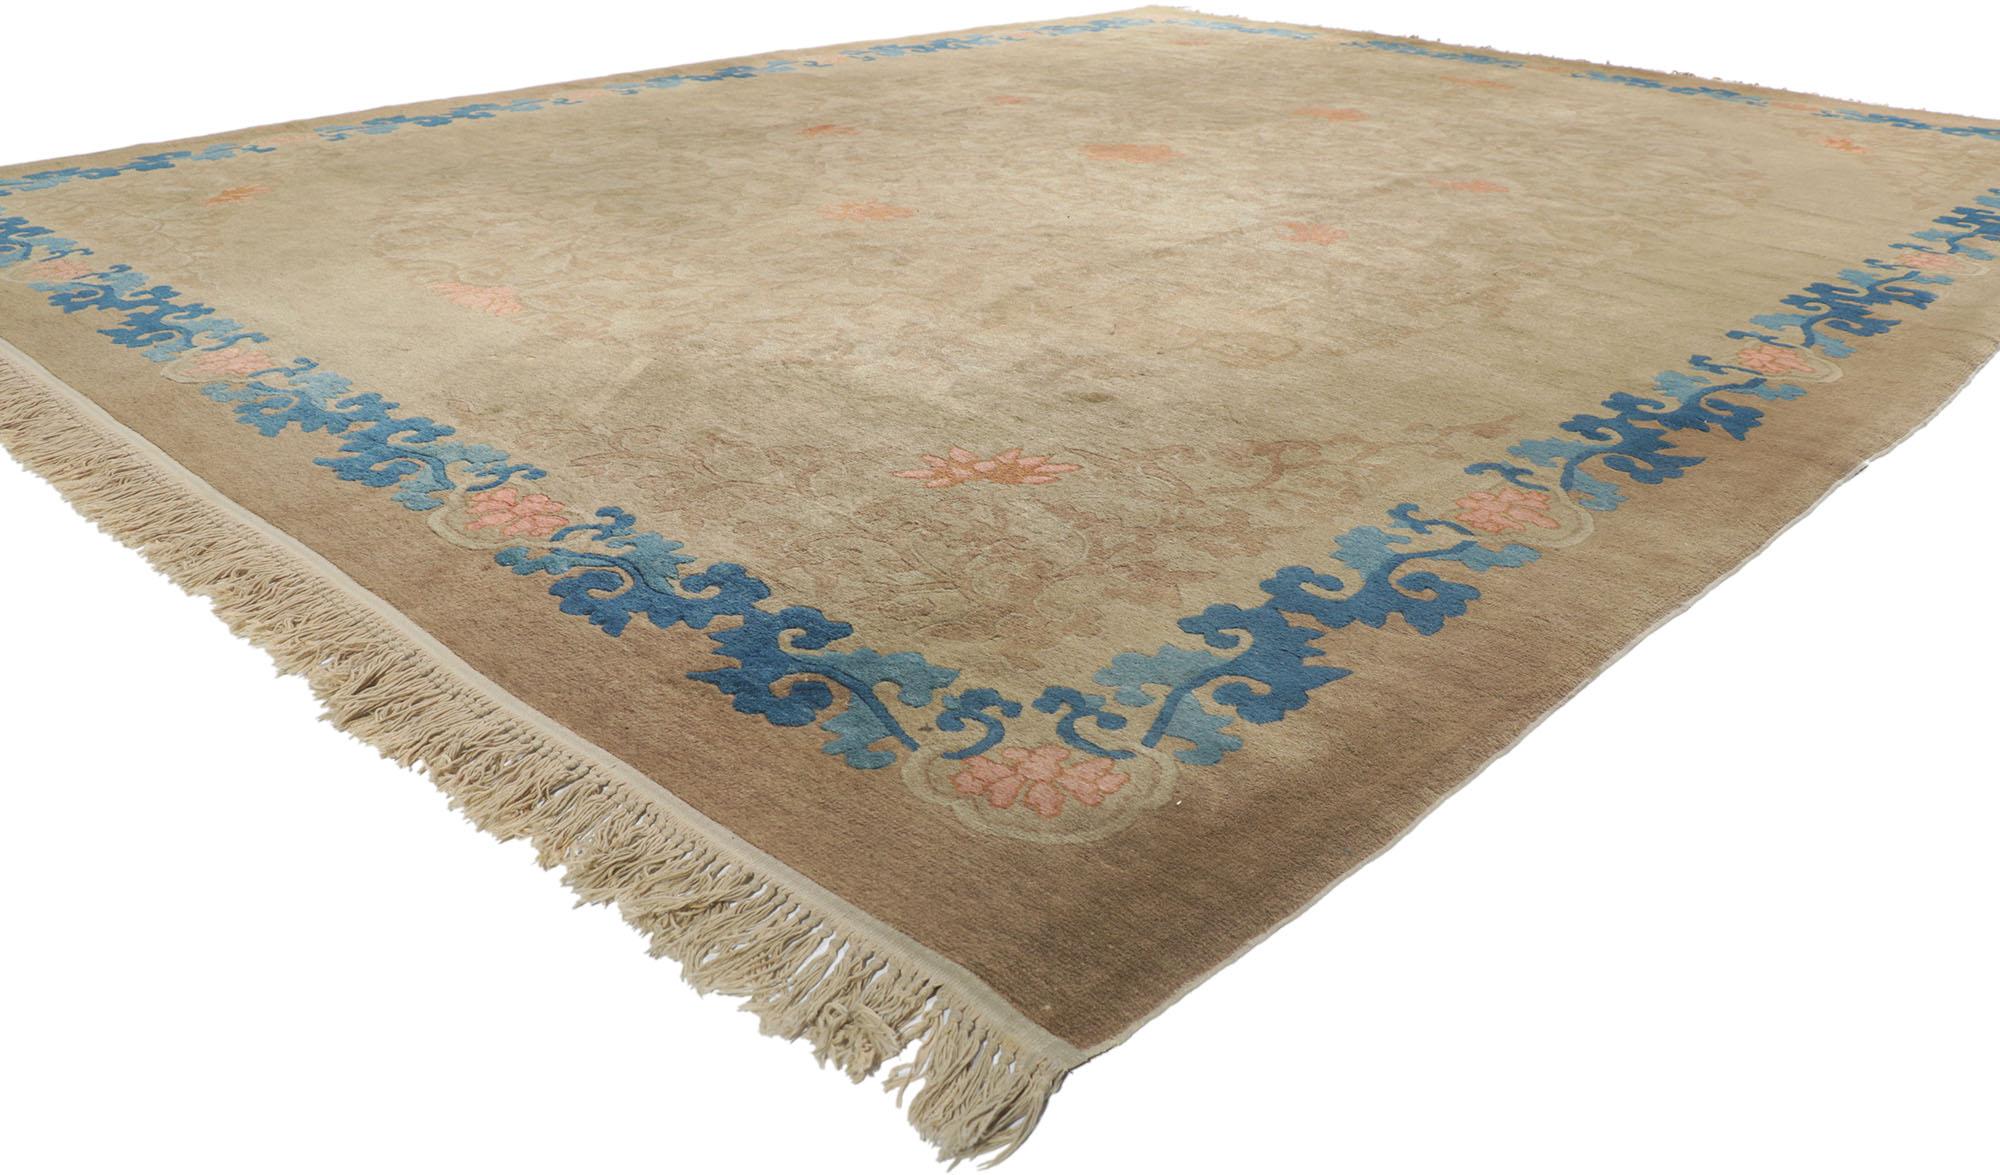 78231 Antique Chinese Peking Rug,  09'04 x 11'08.
Rendered in variegated shades of tan, sand, cerulean, ecru, blue, peach, rust, taupe, latte, and mocha with other accent colors. Desirable Age Wear. A couple spots. Abrash. Hand-knotted wool. Made in